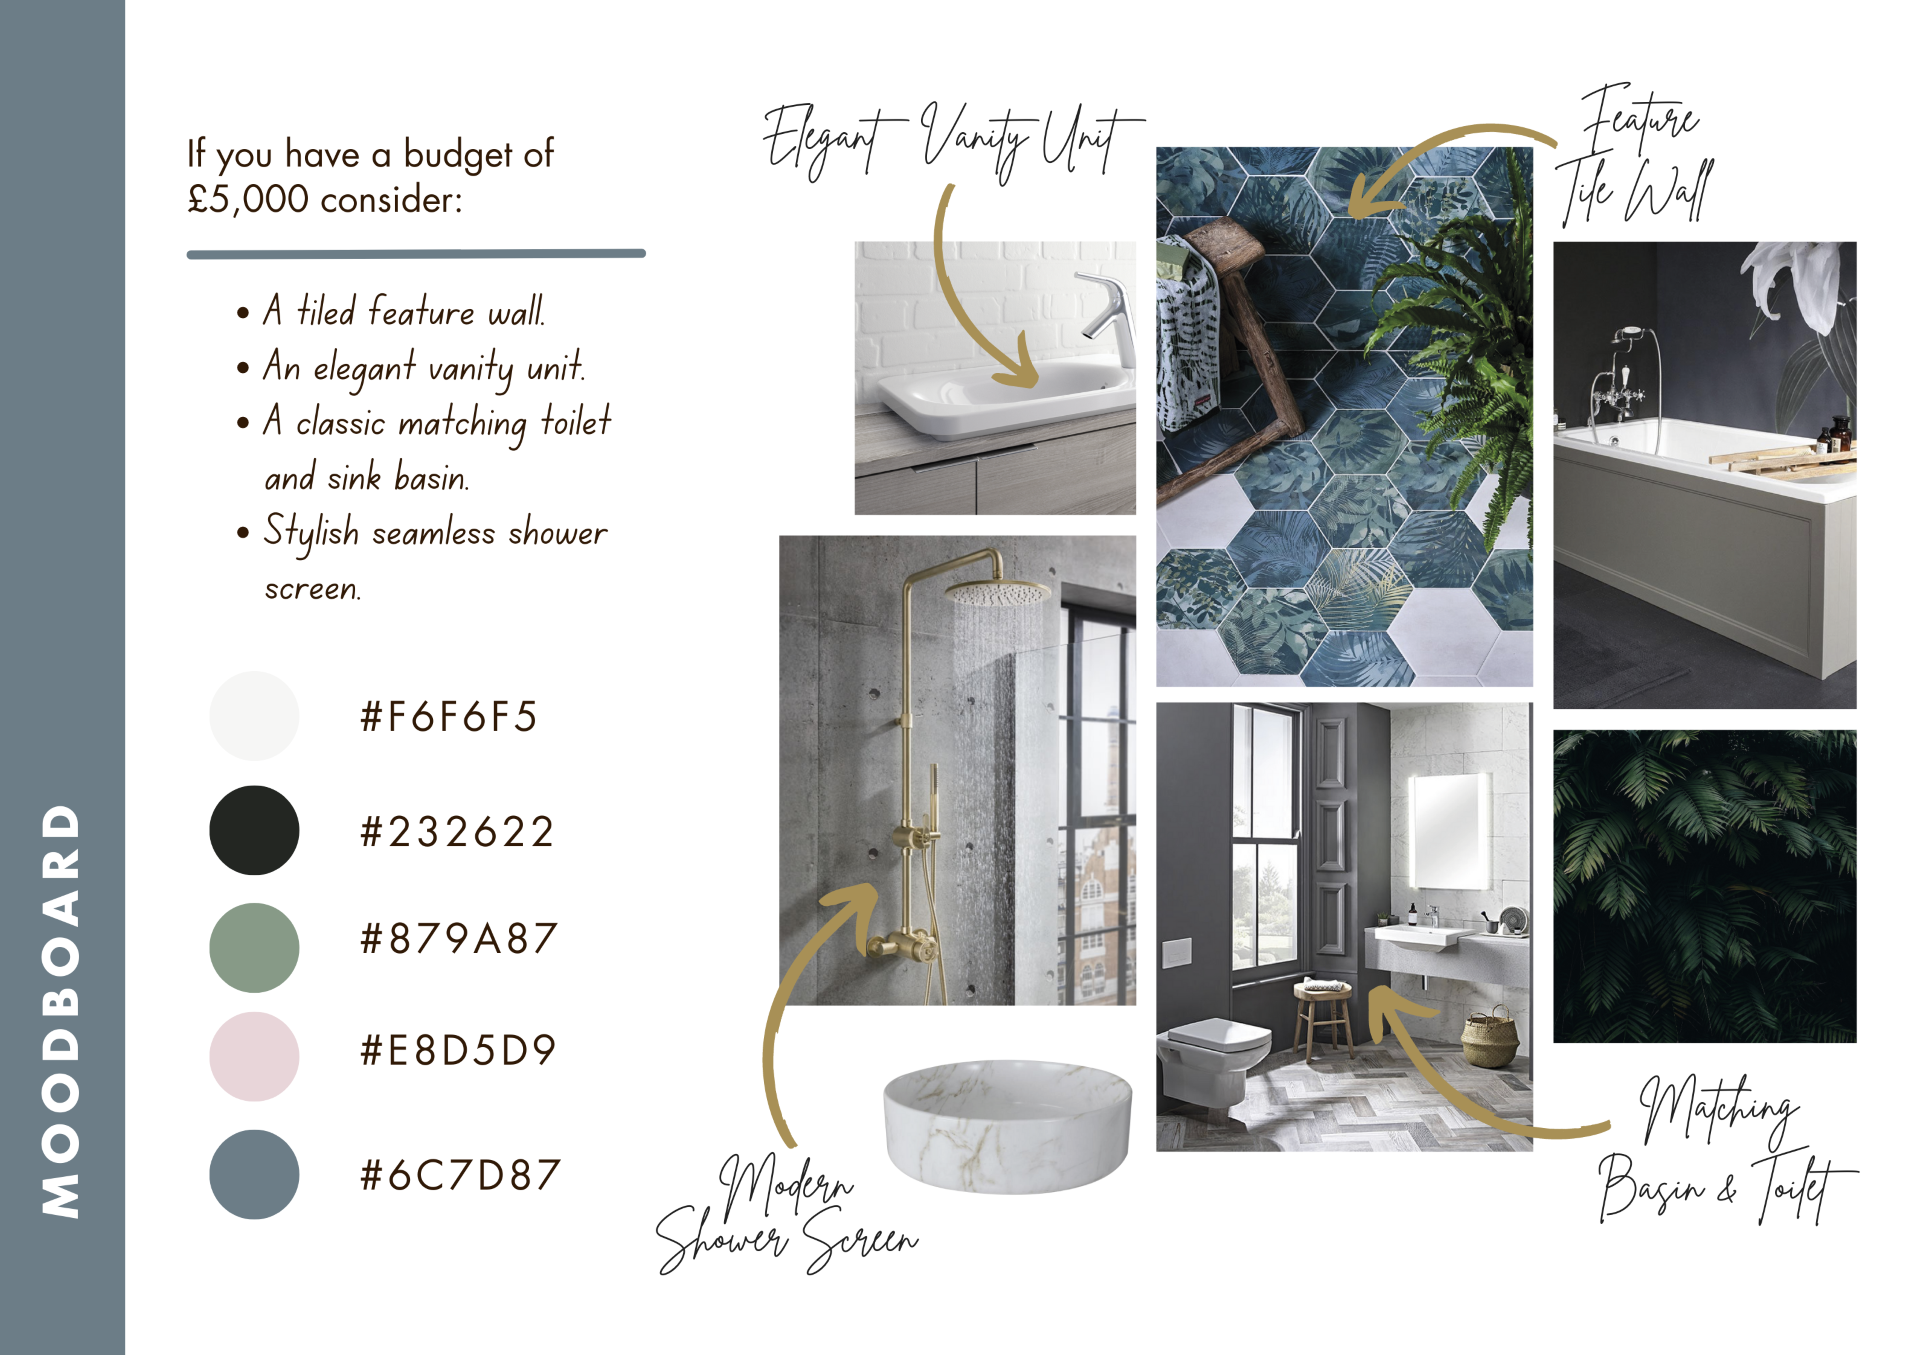 infographic showing moodboard of images for what can be done on a £5000 budget when renovating a bathroom